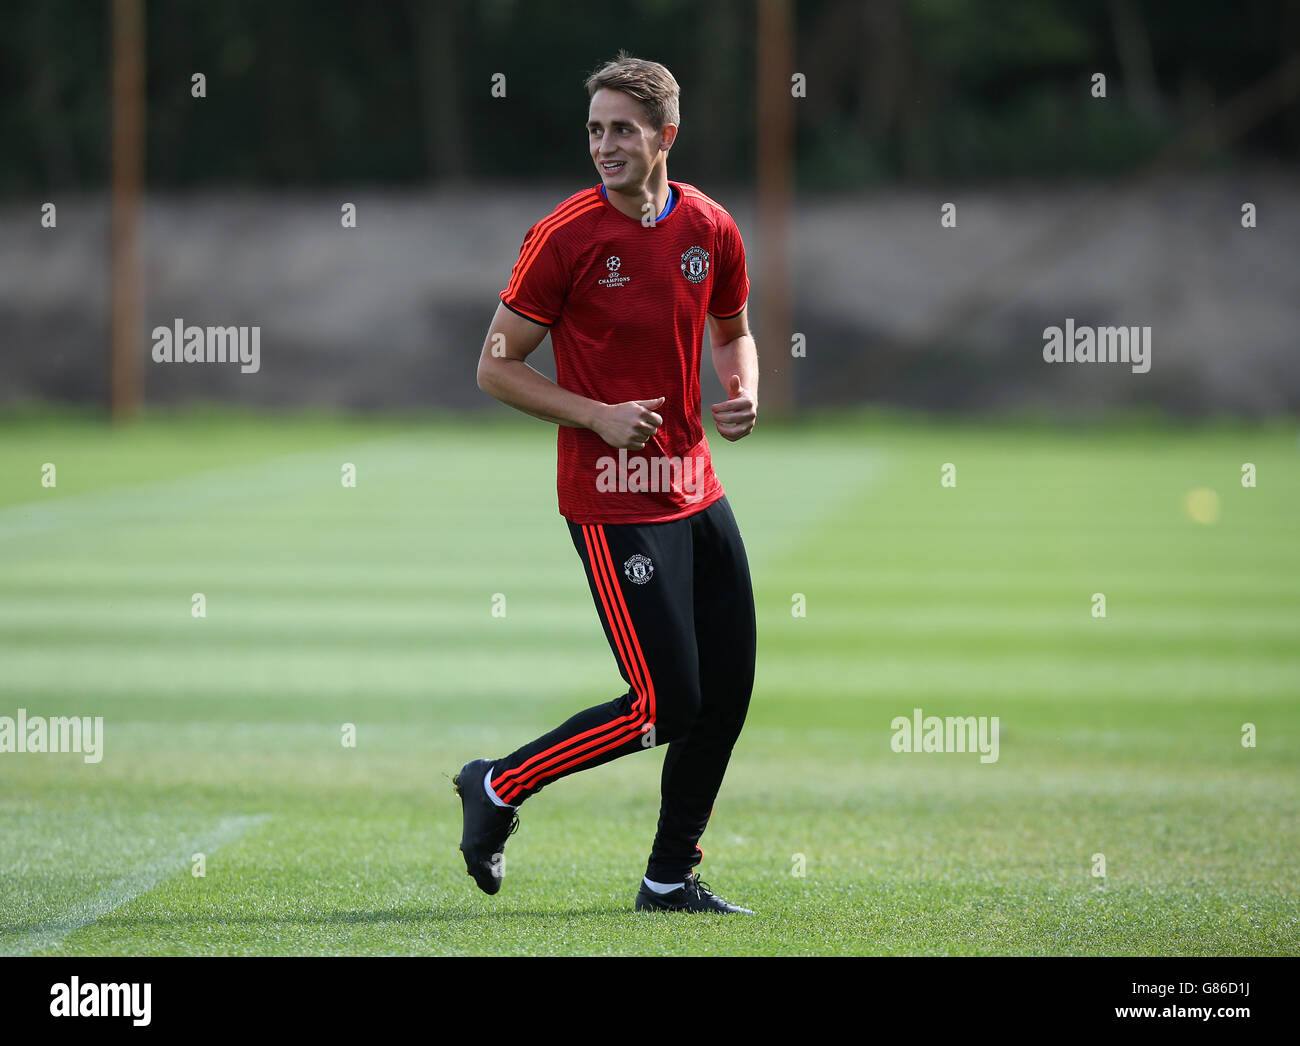 Manchester United's Adnan Januzaj during a training session at the Aon Training Complex, Manchester. Stock Photo